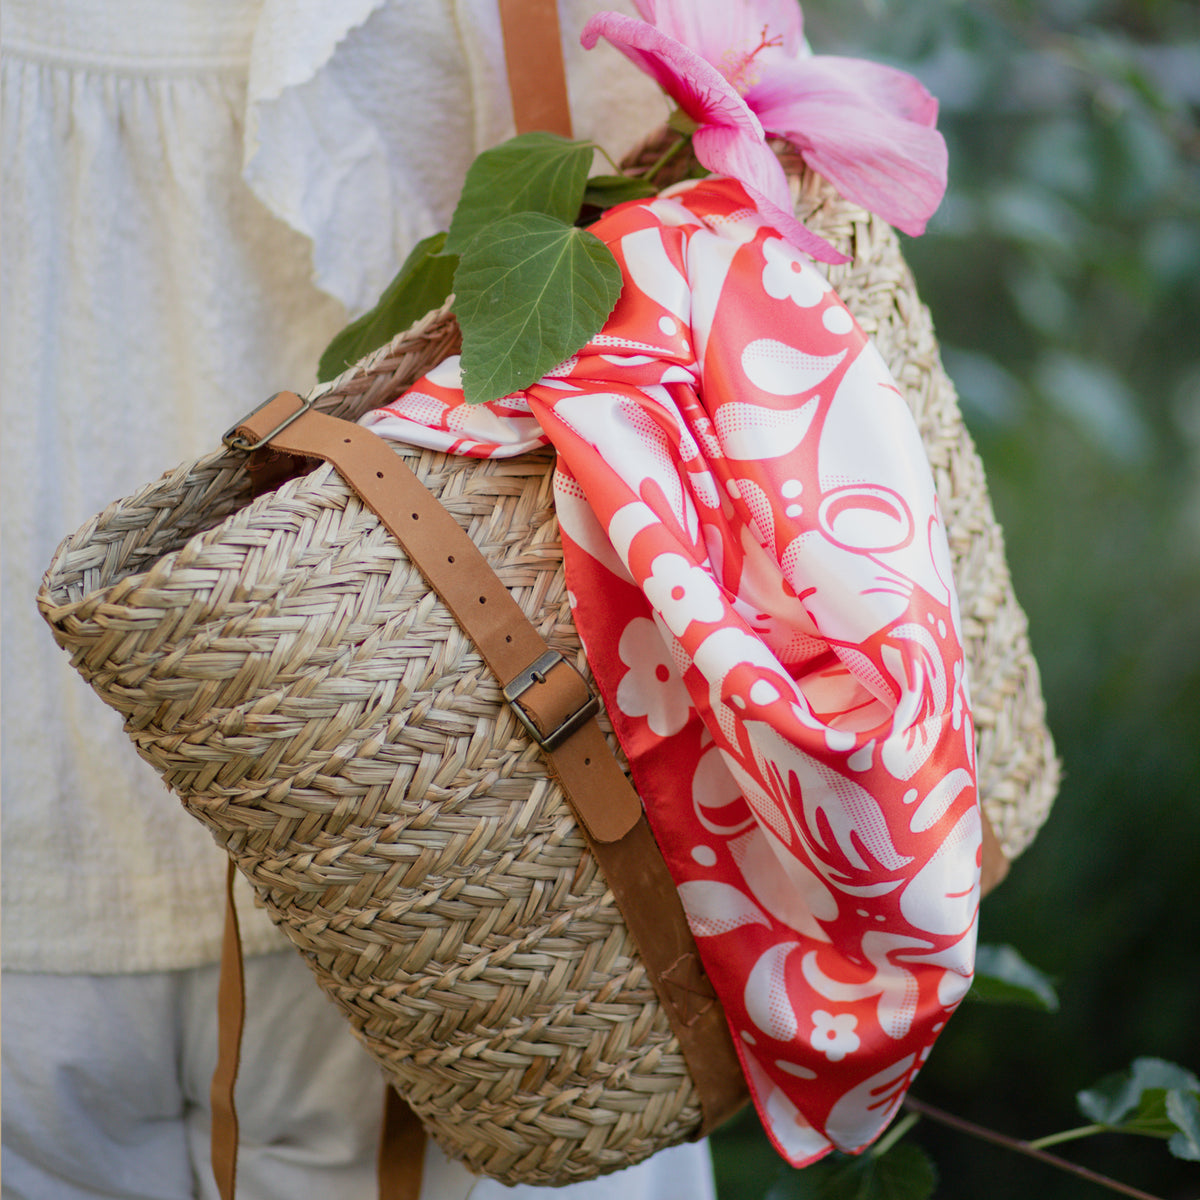 A lifestyle photograph of the scarf hanging out of a woven purse.